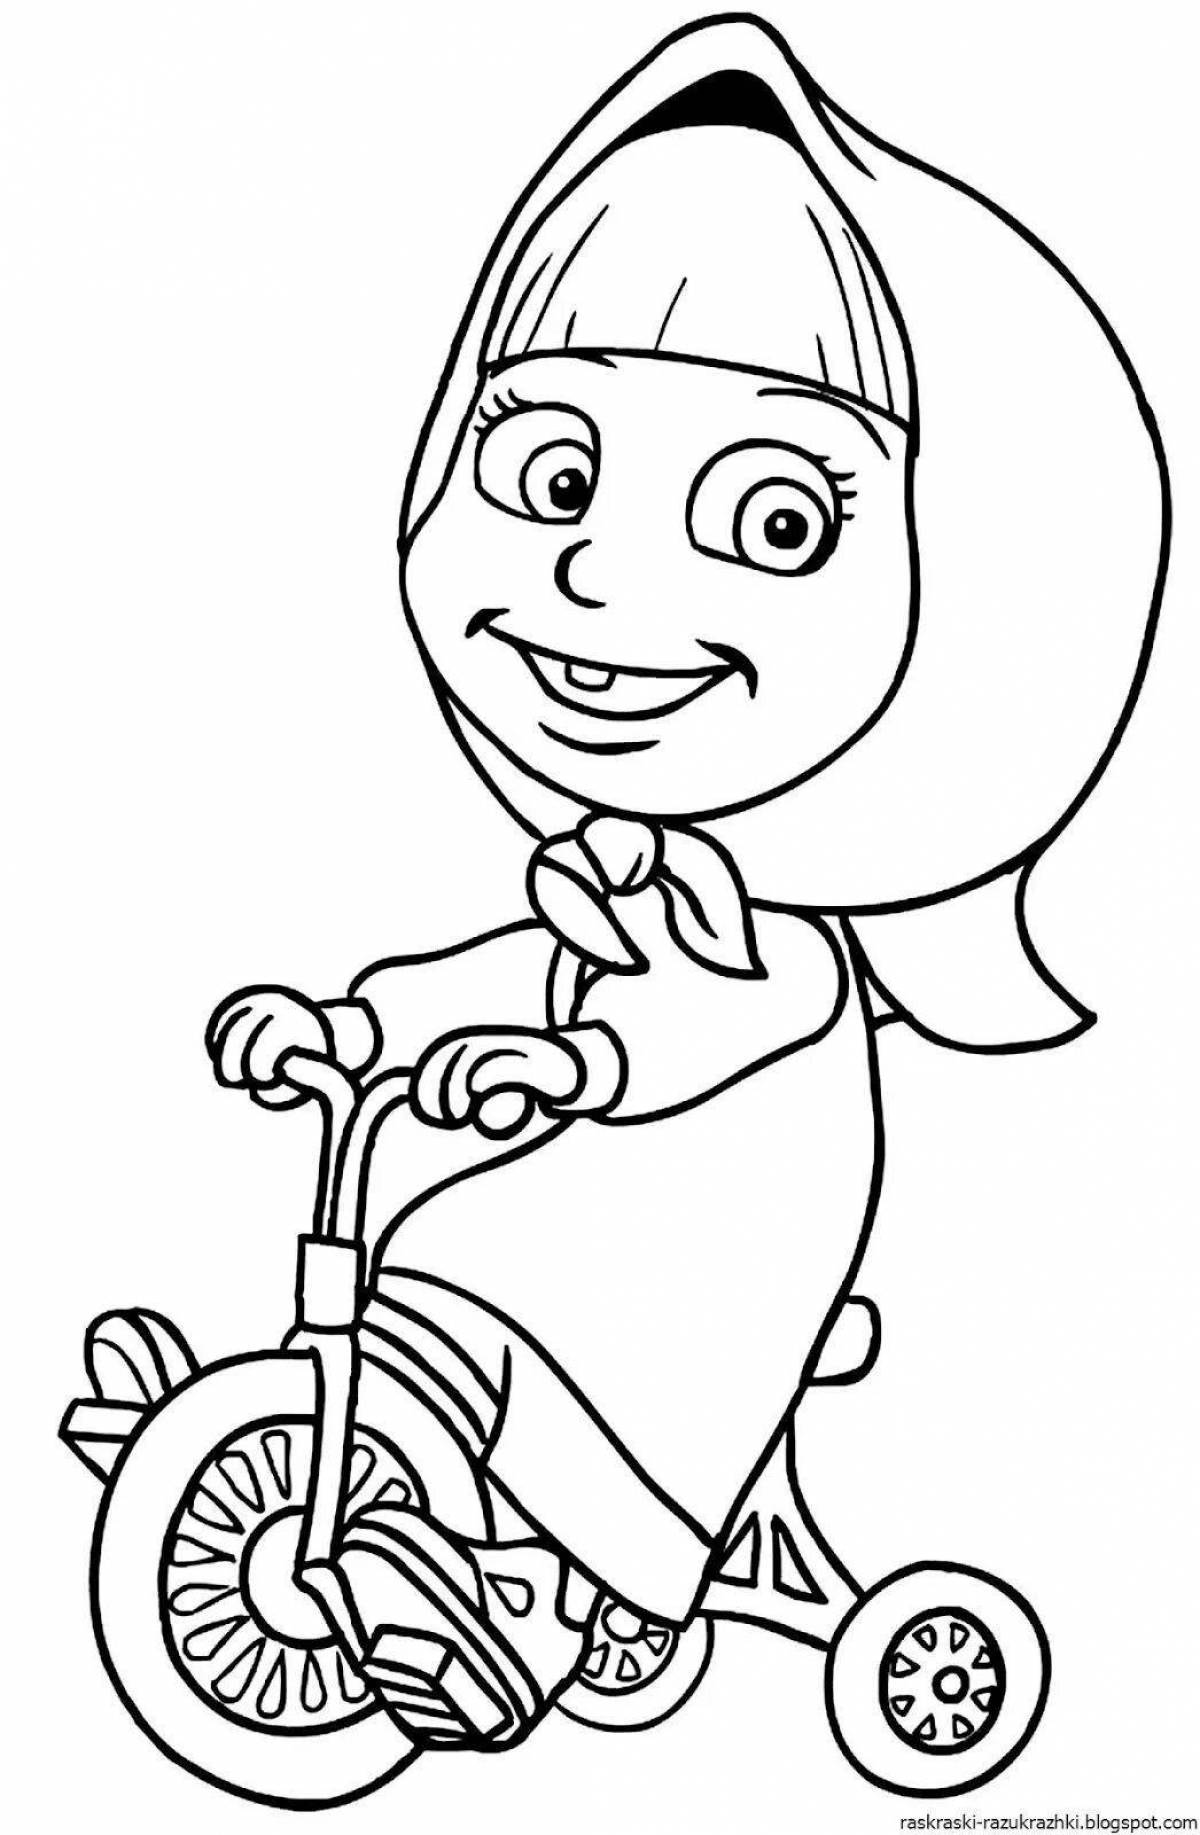 Gorgeous masha and the bear coloring book